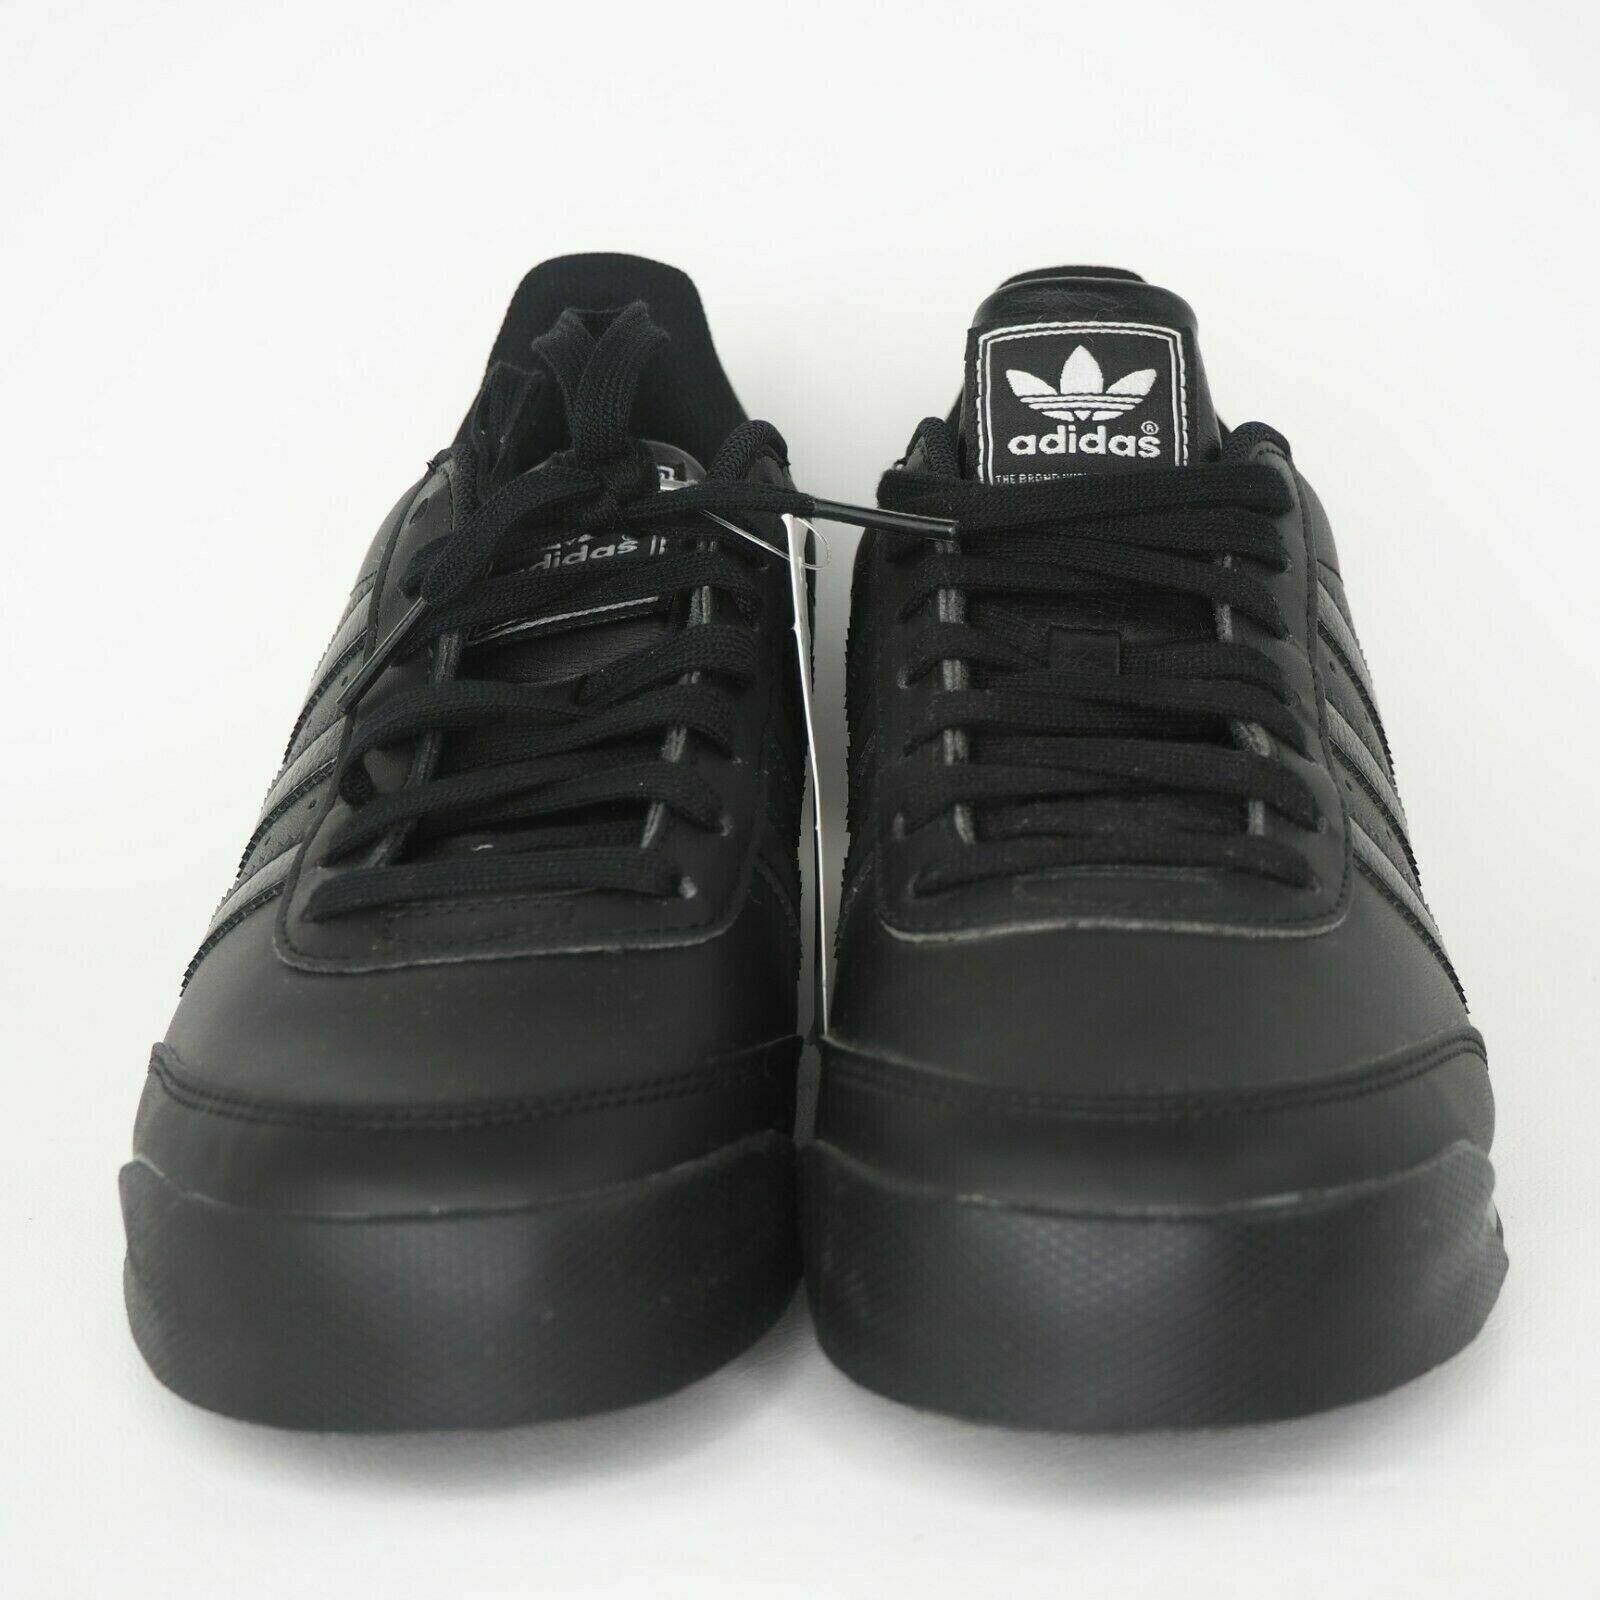 Adidas shoes Orion - Black 2